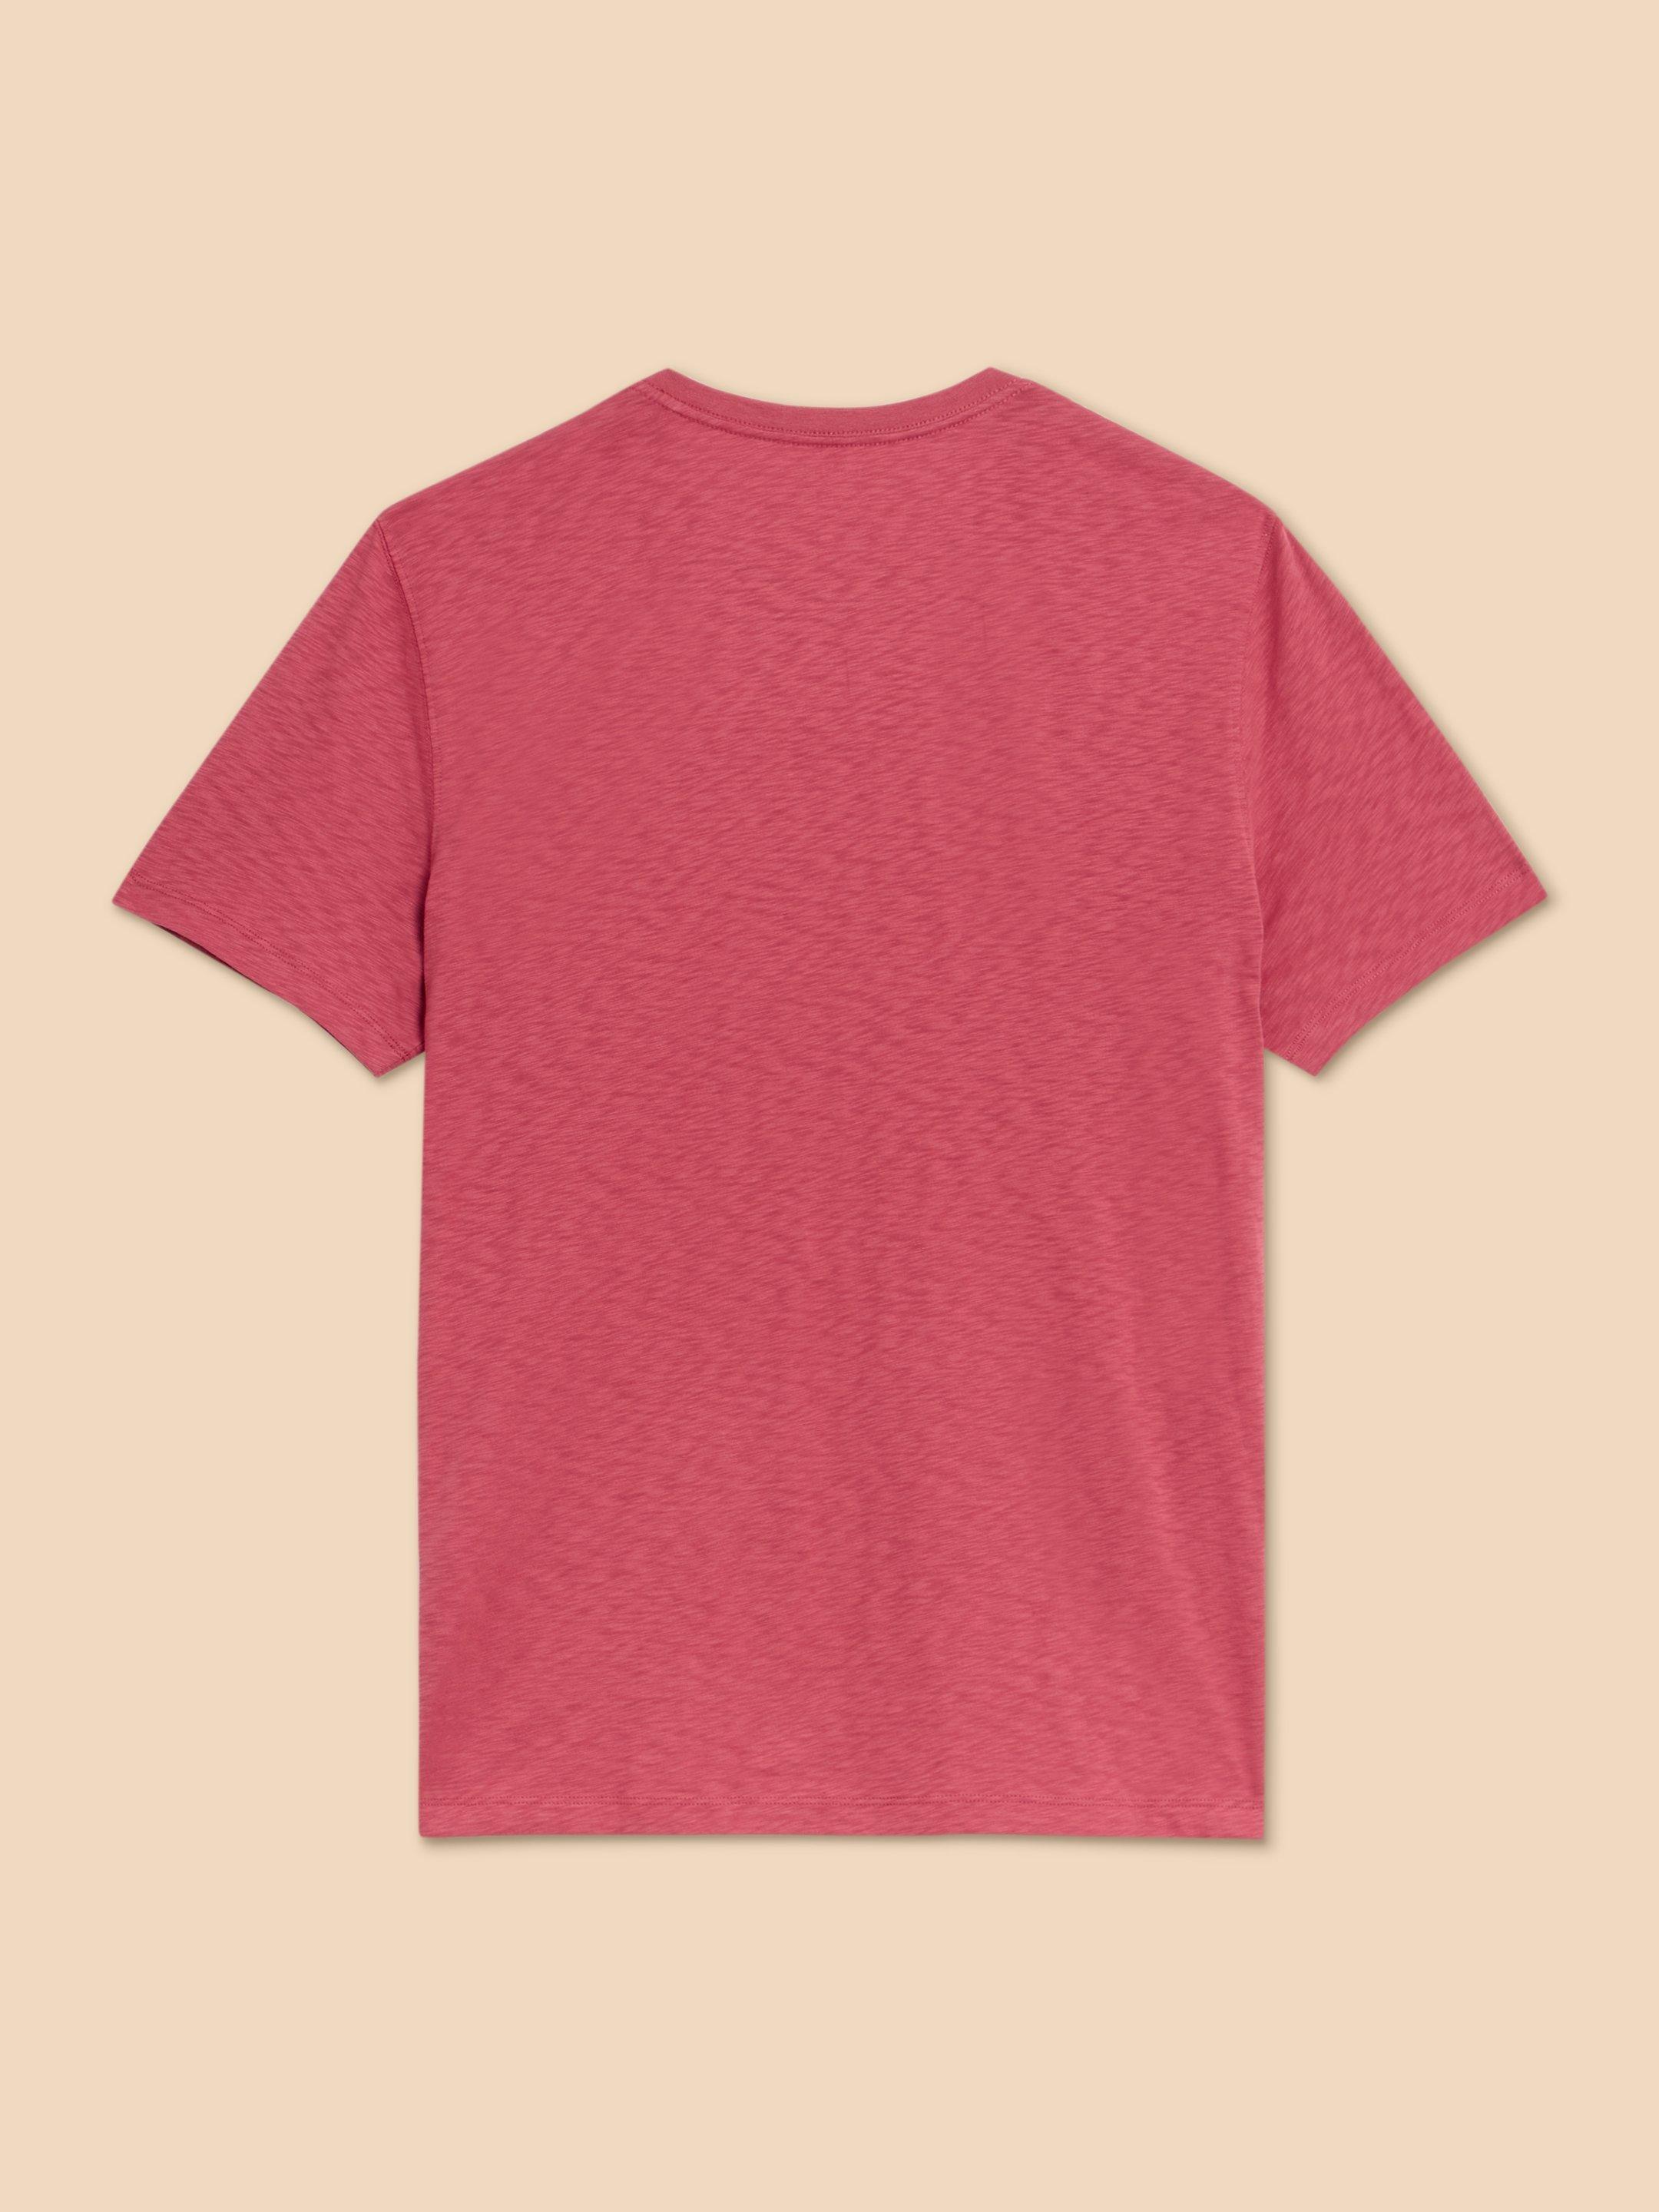 Surf Shell Graphic Tee in CORAL PR - FLAT BACK